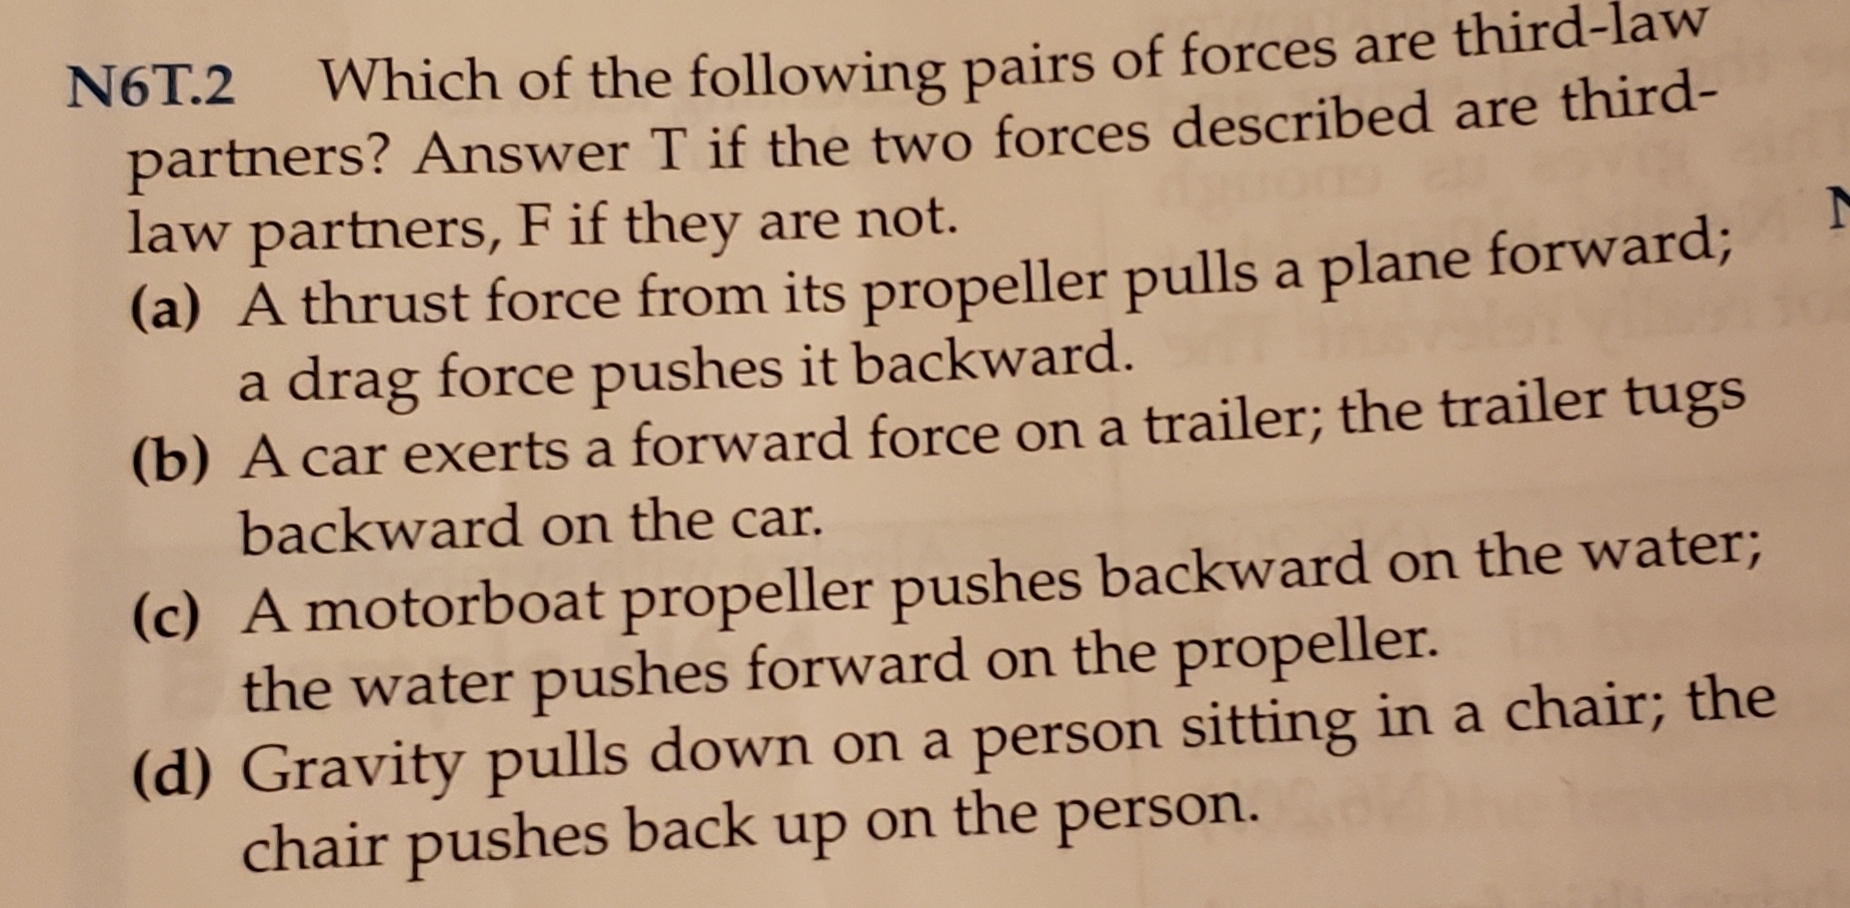 N6T.2
Which of the following pairs of forces are third-law
partners? Answer T if the two forces described are third-
law partners, F if they are not.
(a) A thrust force from its propeller pulls a plane forward;
a drag force pushes it backward.
(b) A car exerts a forward force on a trailer; the trailer tugs
backward on the car.
(c) A motorboat propeller pushes backward on the water
the water pushes forward on the propeller.
(d) Gravity pulls down on a person sitting in a chair; the
chair pushes back up
the person.
on
